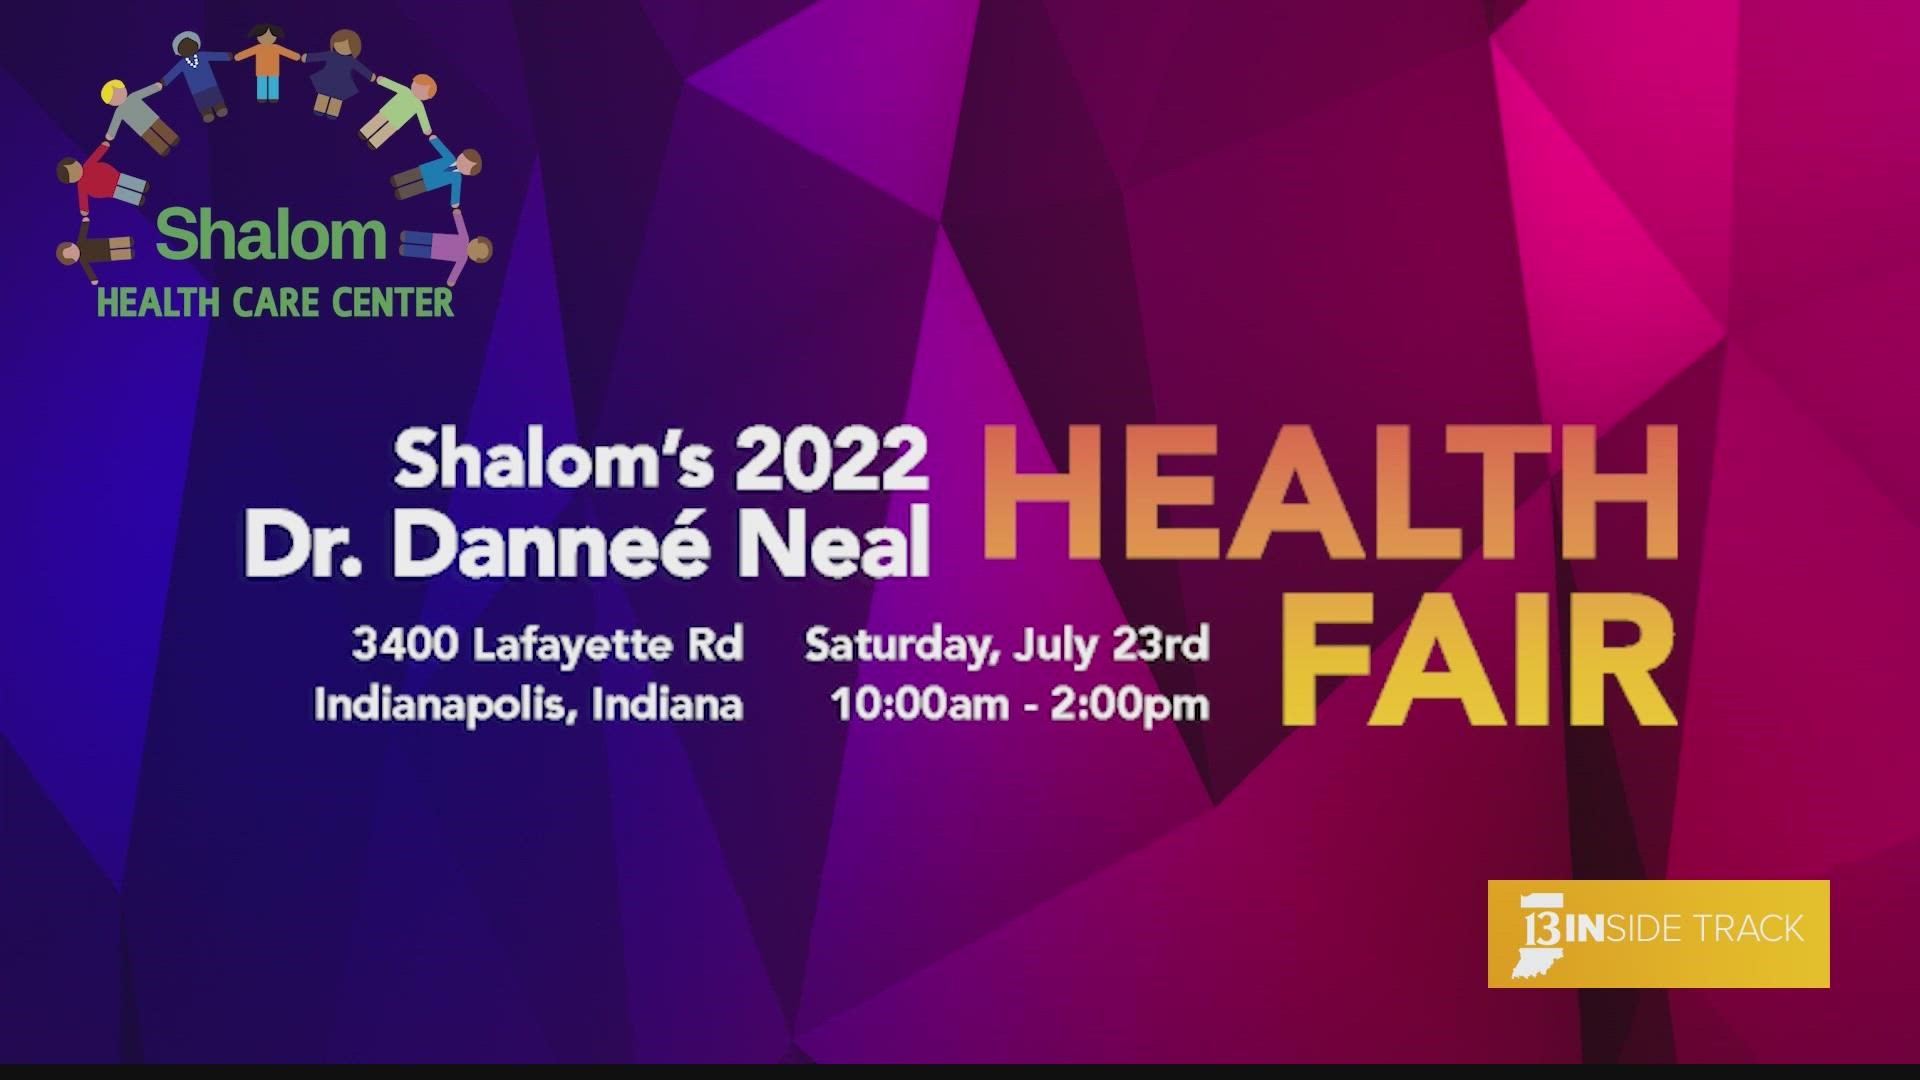 Vision, dental, glucose, and cholesterol are just a few of the free screenings available from Shalom Health Care Center at the July 23 Health Fair in Indianapolis